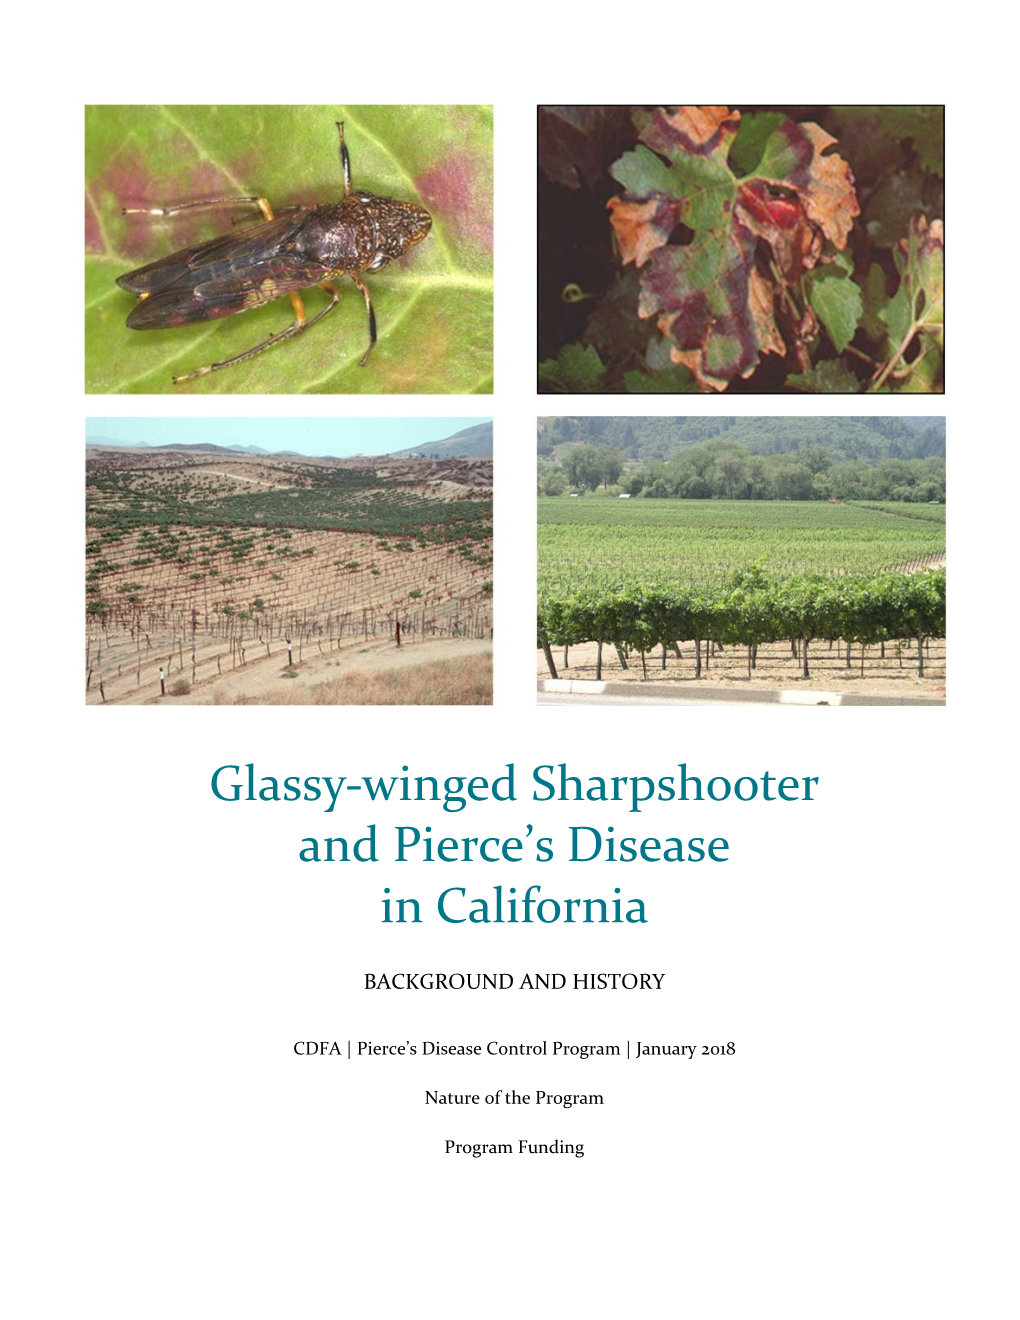 Glassy-Winged Sharpshooter and Pierce's Disease in California